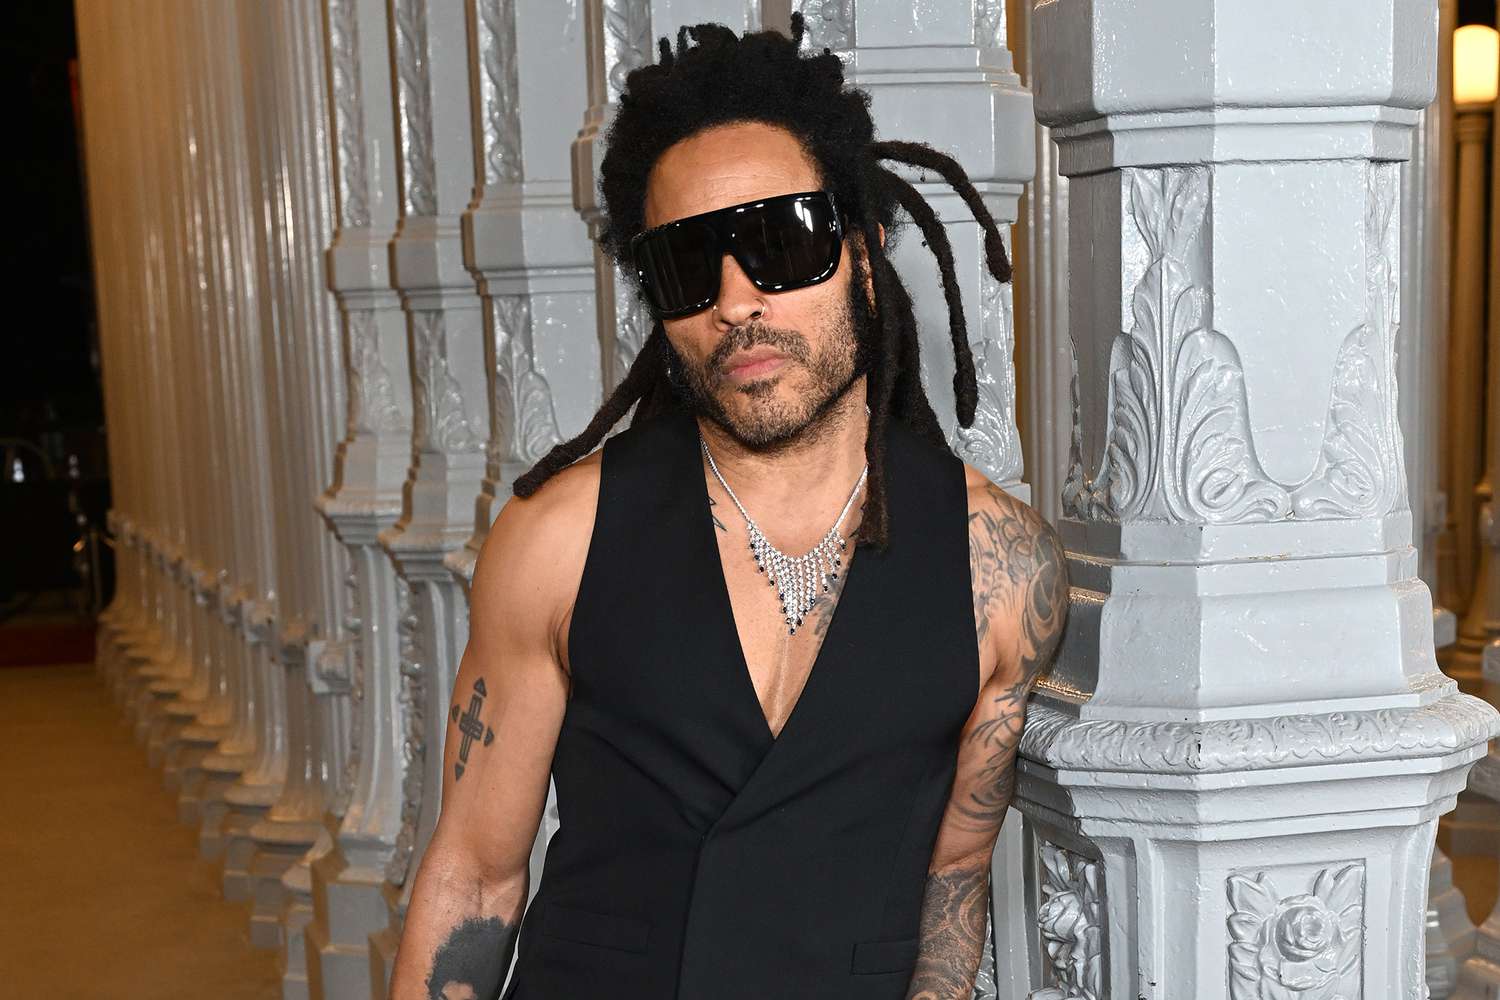 Lenny Kravitz says he’s celibate, hasn't been in a serious relationship for 9 years: ‘It’s a spiritual thing’